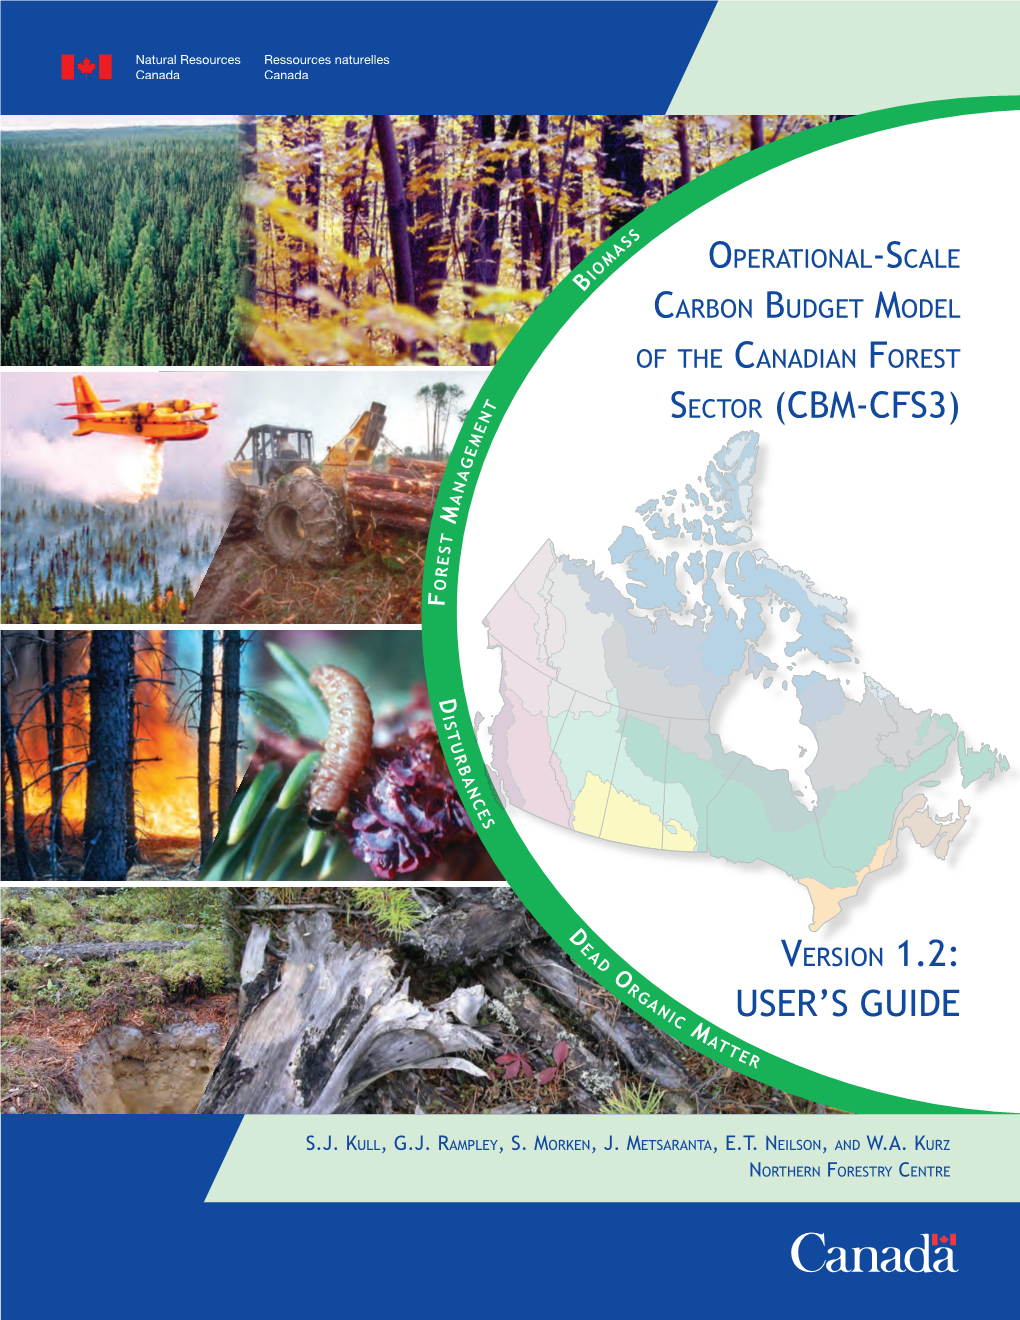 Operational-Scale Carbon Budget Model of the Canadian Forest Sector (Cbm-Cfs3) Version 1.2: User’S Guide